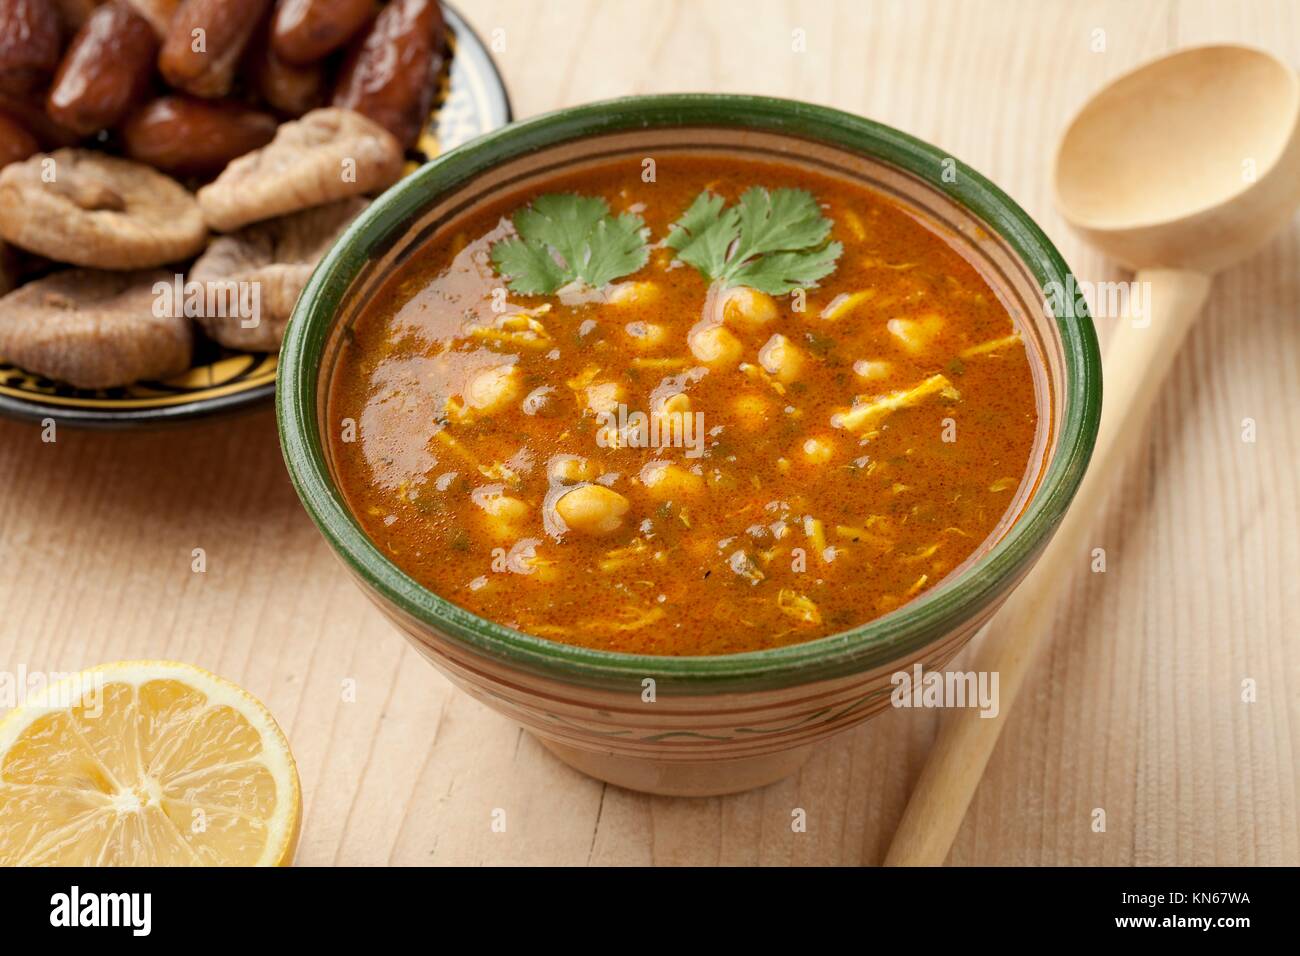 Bowl of Moroccan harira soup, lemon, dates and figs for iftar. Stock Photo